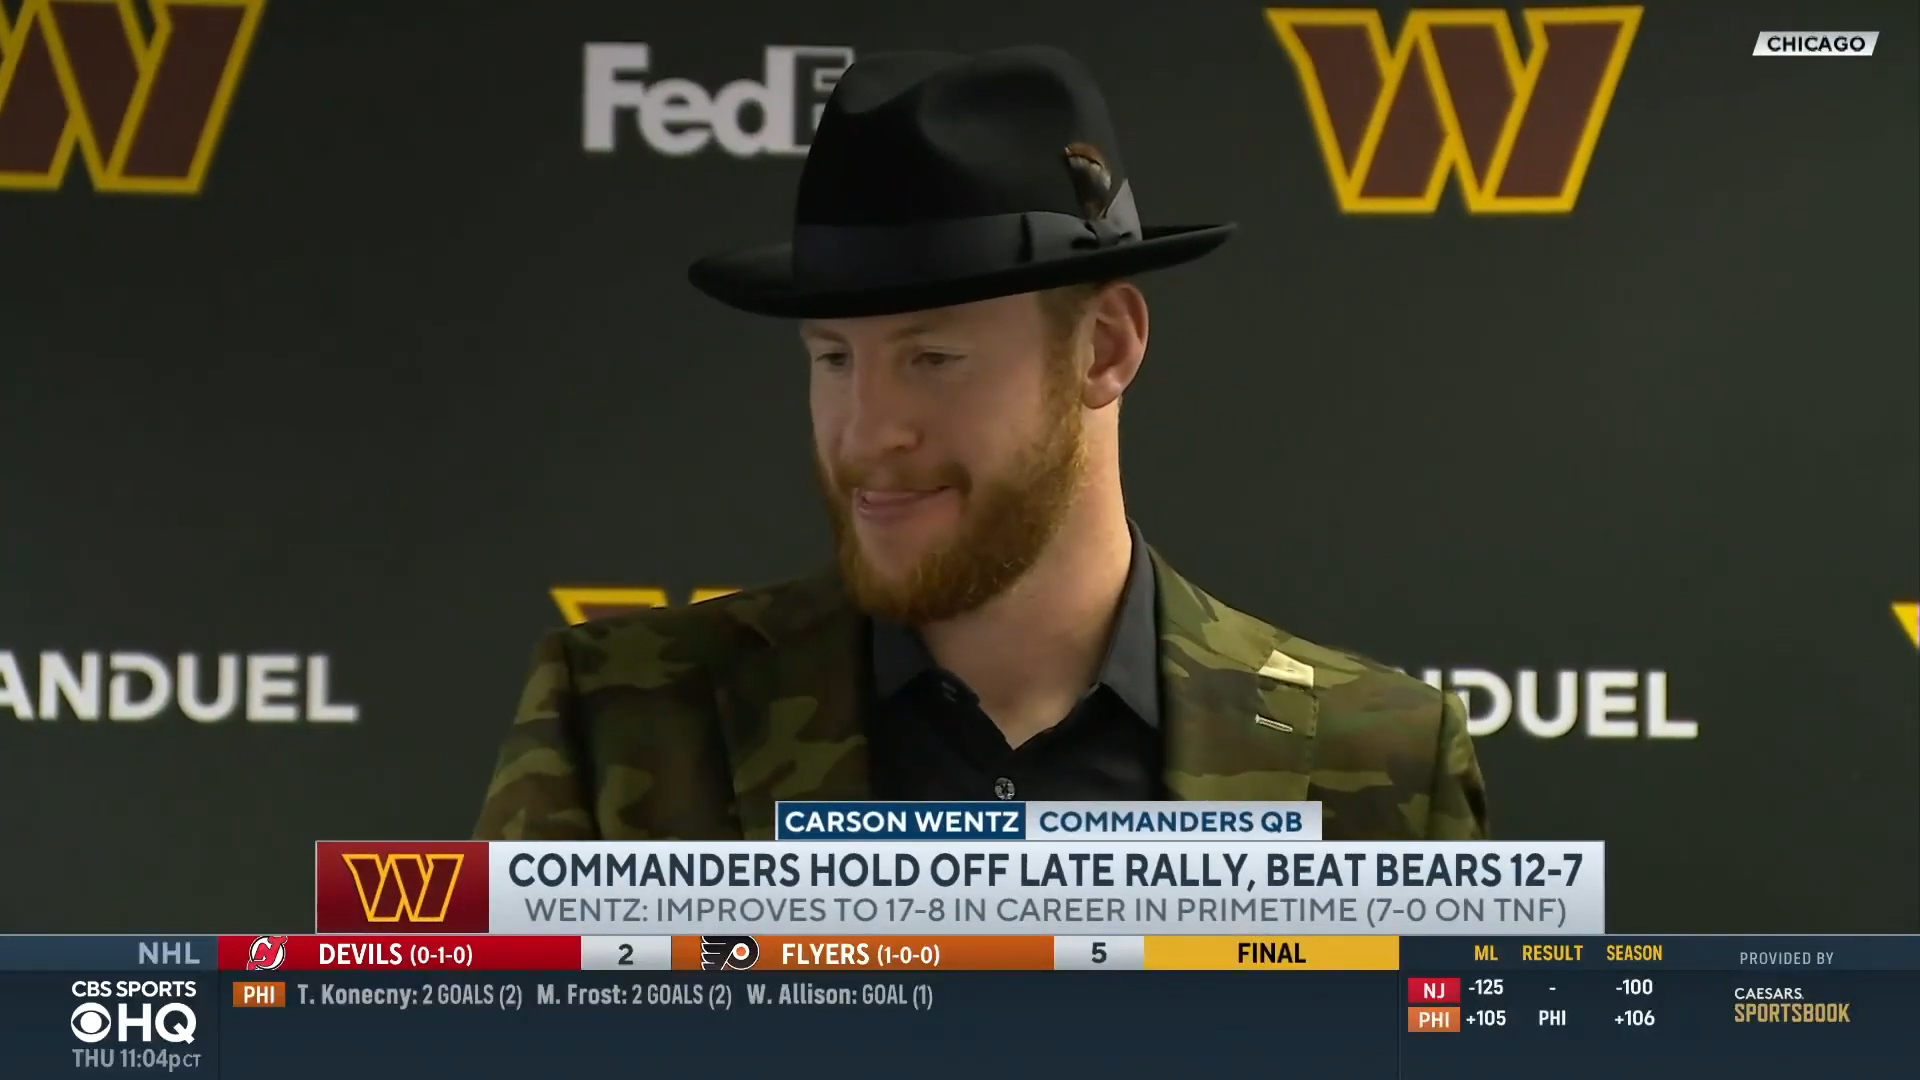 Carson Wentz dressed in a camo blazer and goofy hat after the Commanders' win.